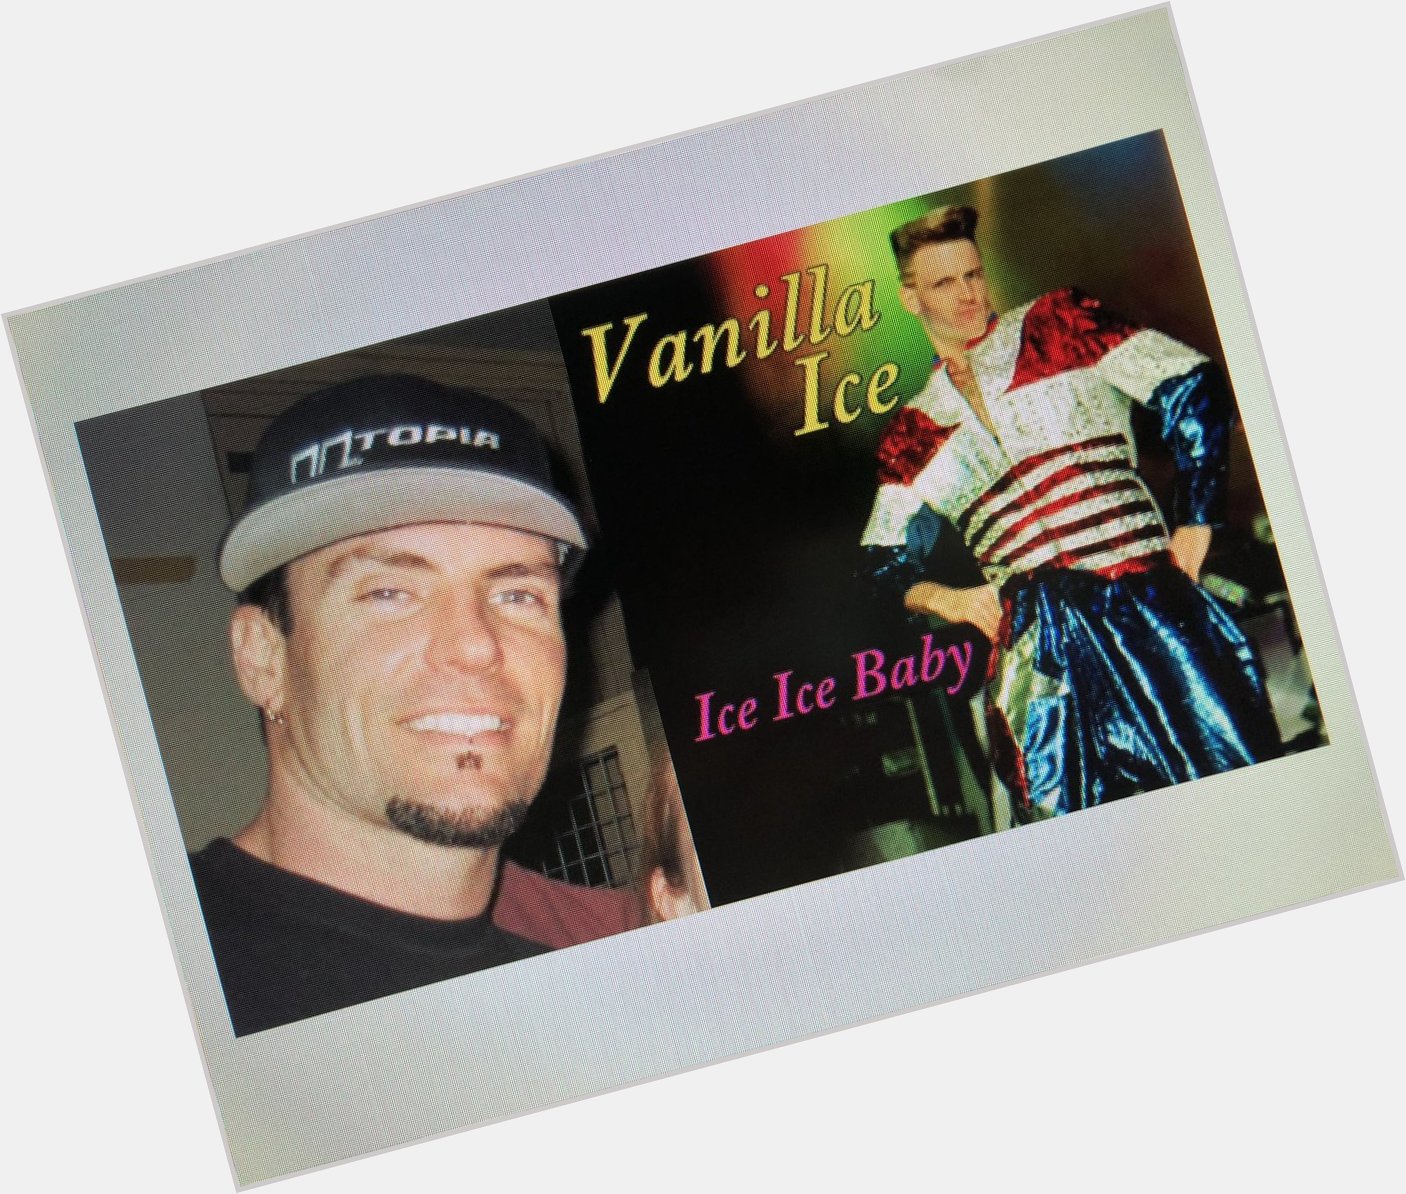 Happy 52nd Birthday to Vanilla Ice! The rapper who performed Ice Ice Baby. 